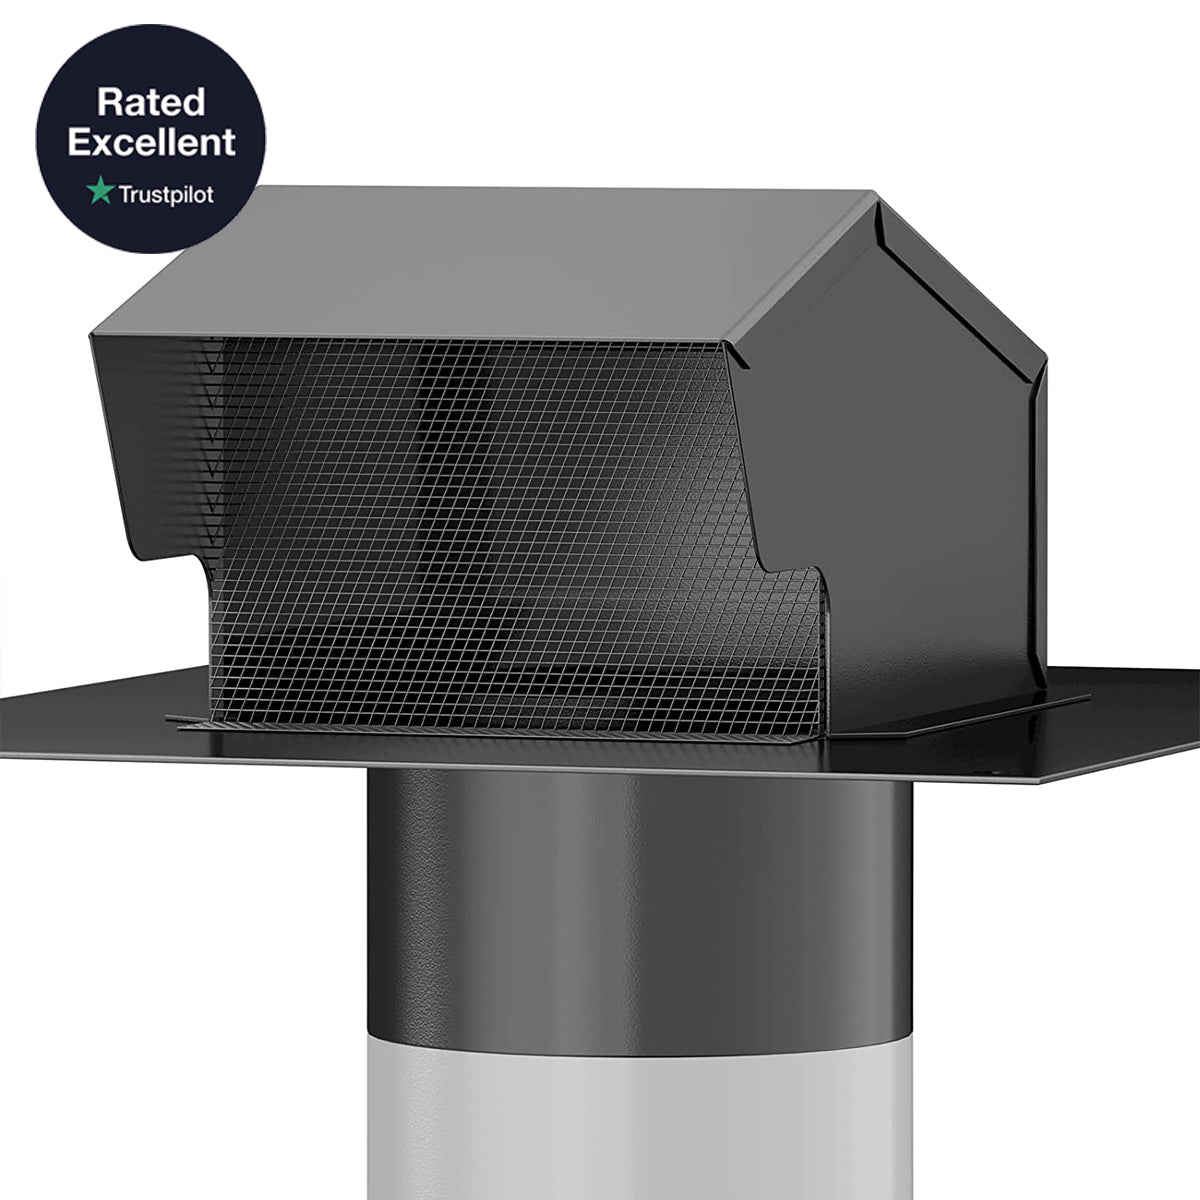 4/6/8 Inch（Black） Removable Roof Vents Galvanized Steel for Ventilation System-with Damper